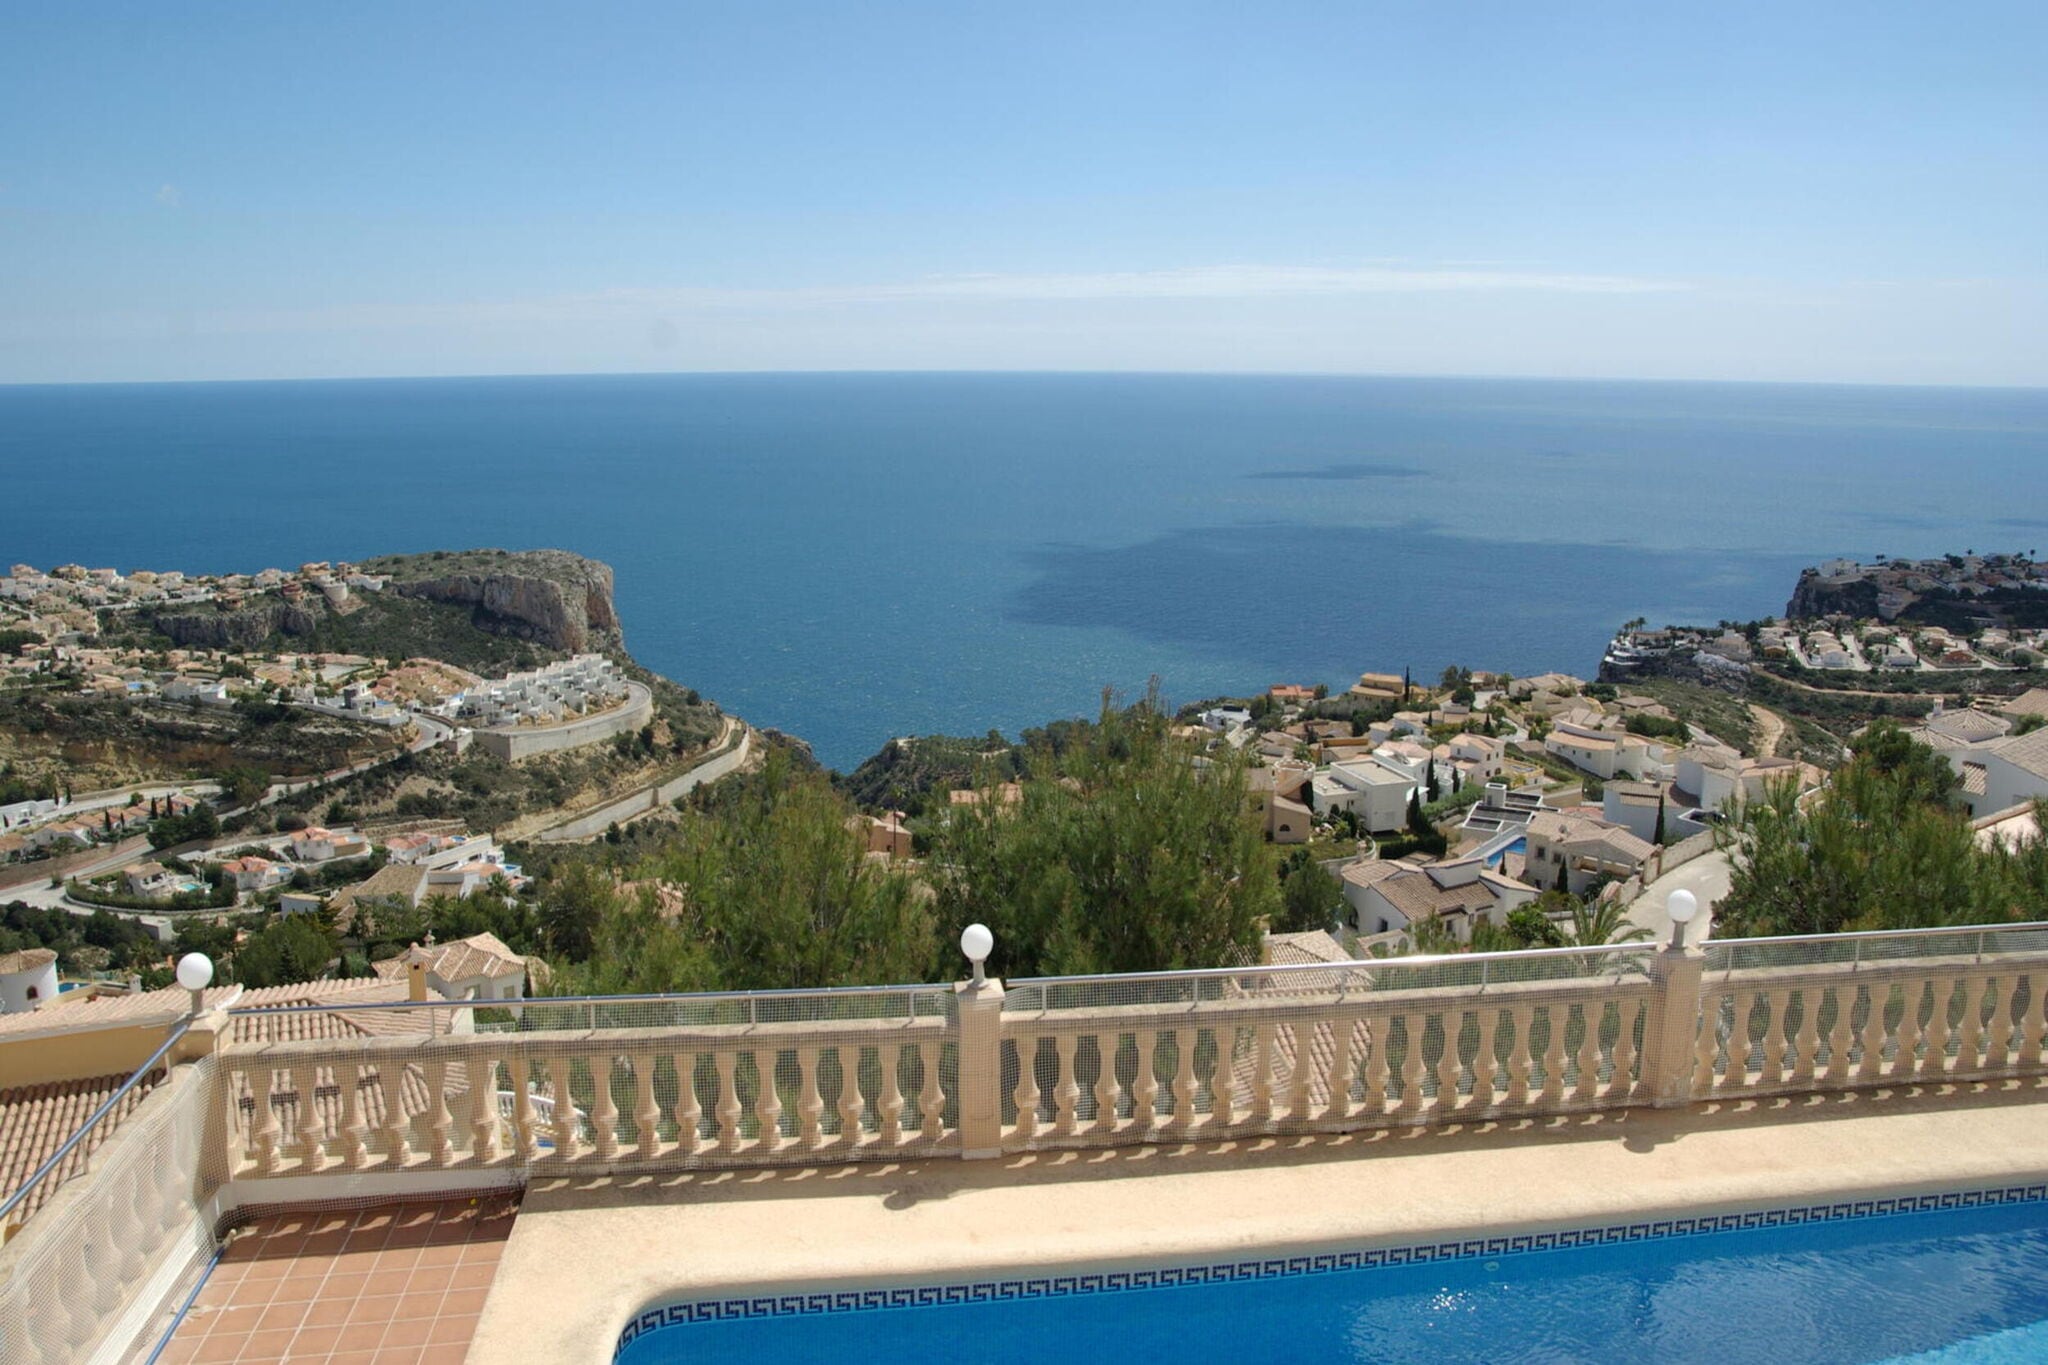 Amazing villa in Benitachell with private pool